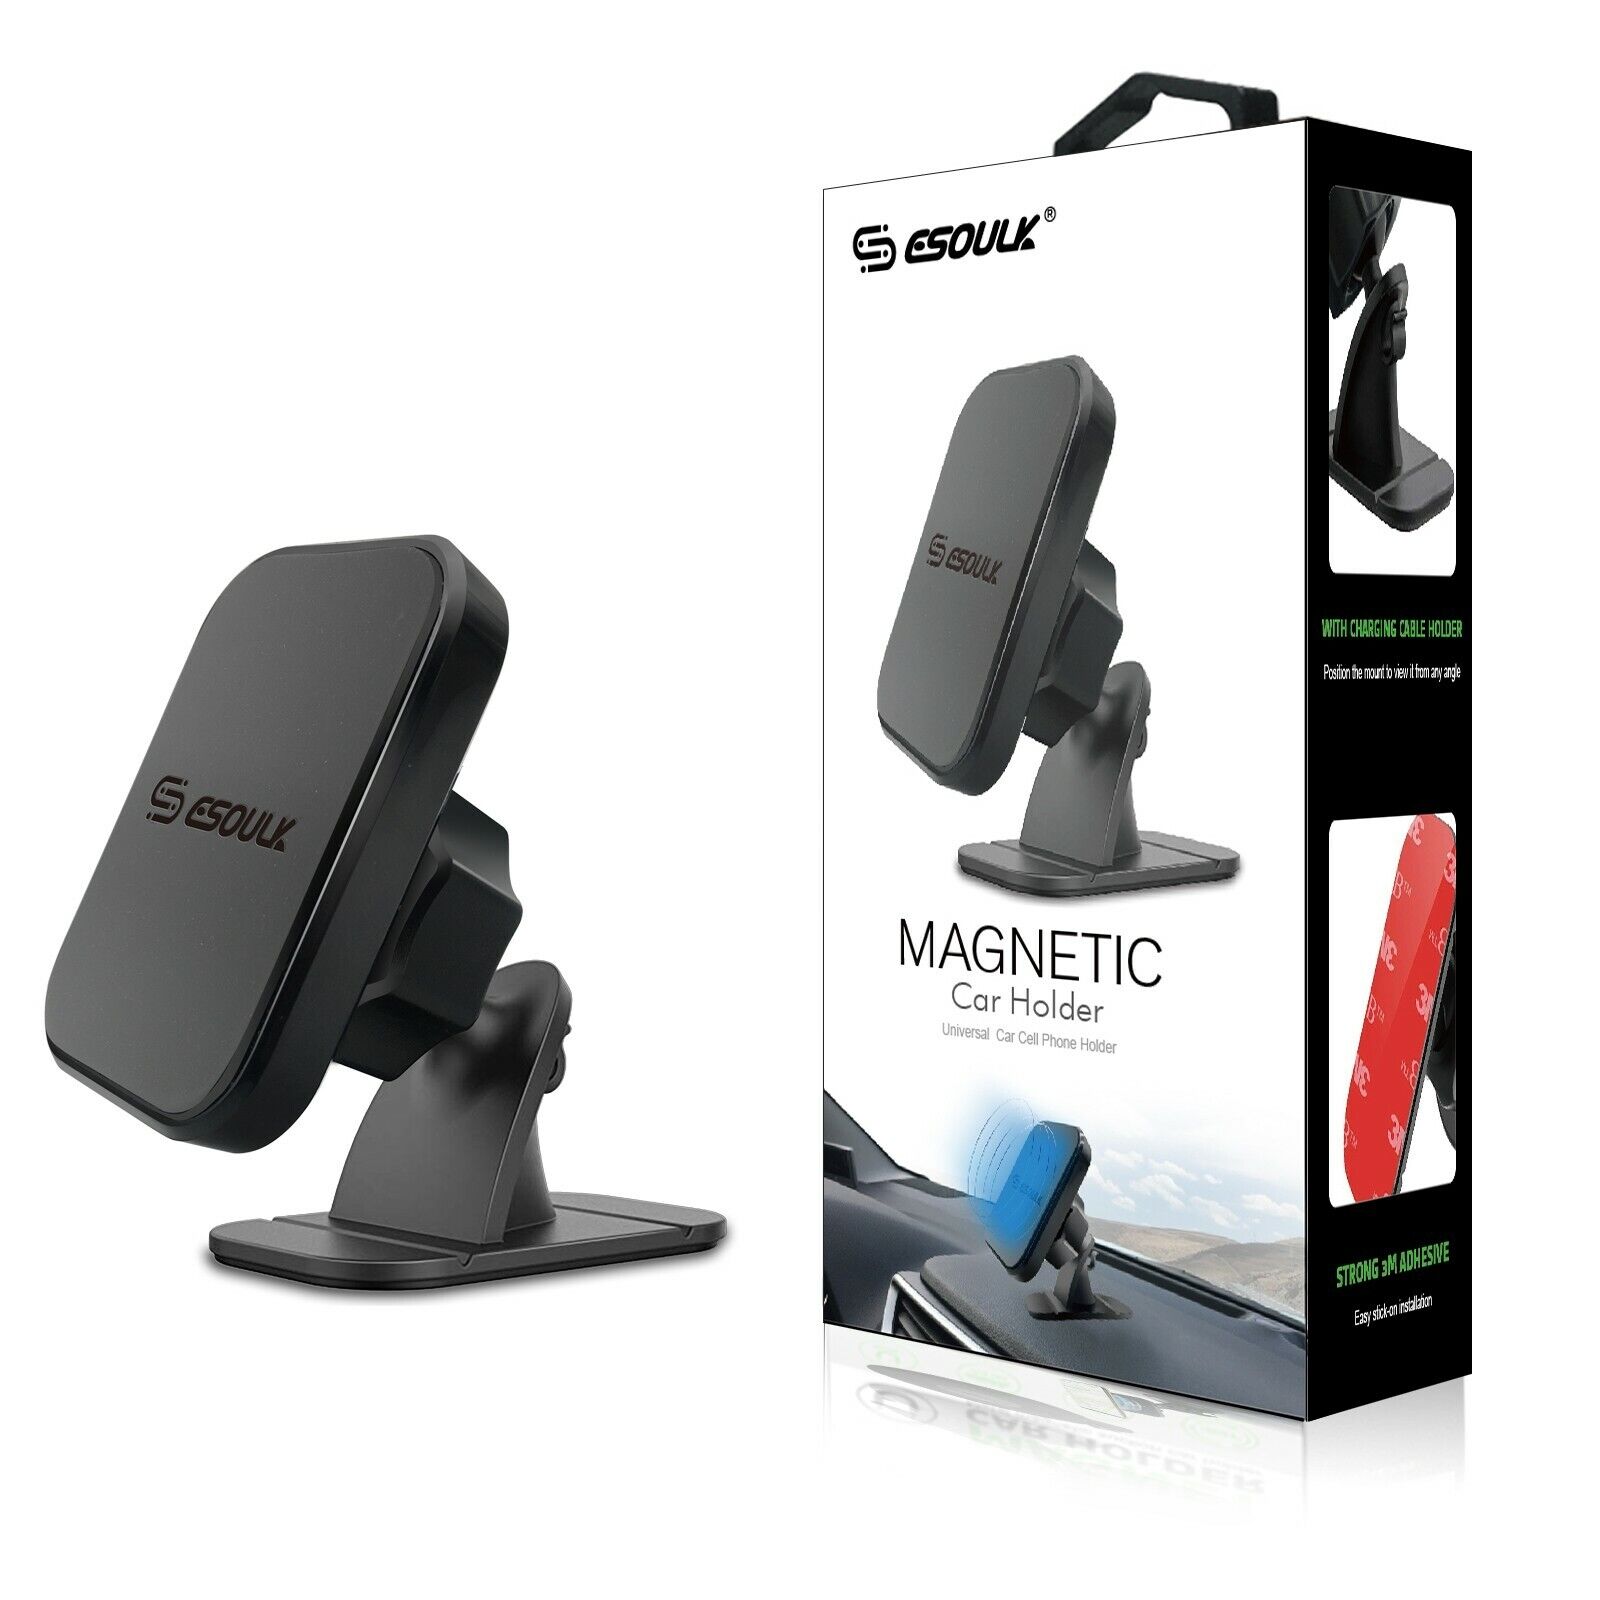 Universal Stick On Dashboard Magnetic Car Mount Holder For iPhone Galaxy GPS